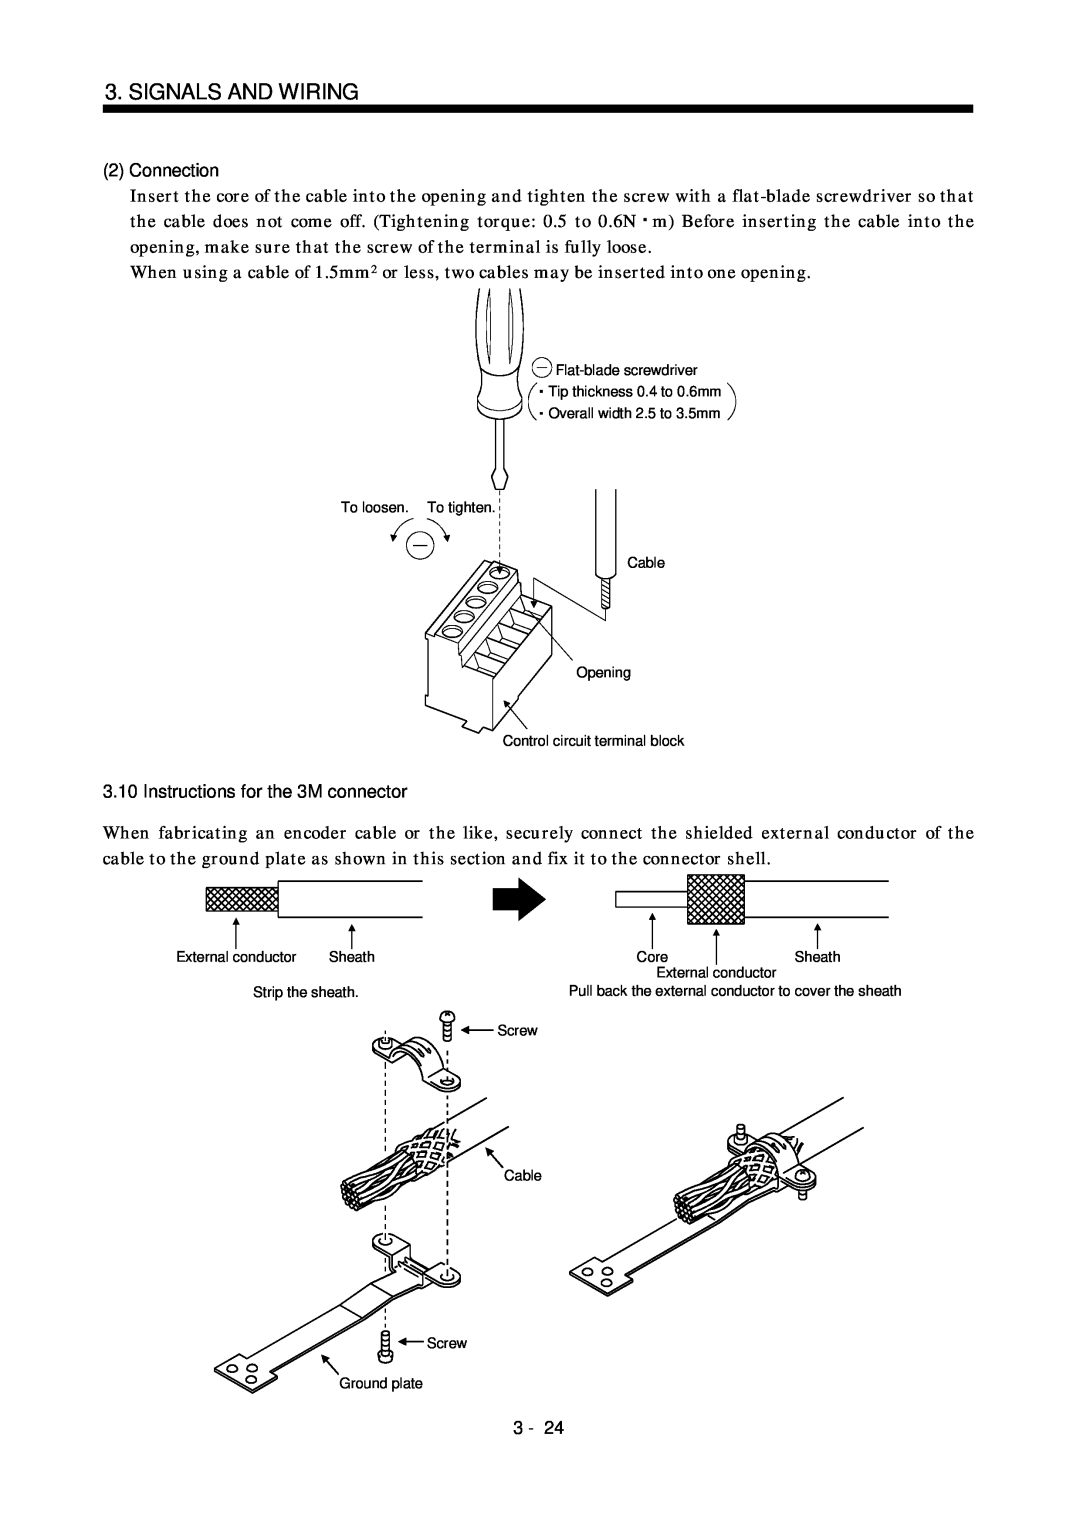 Bose MR-J2S- B instruction manual 2Connection, Instructions for the 3M connector, Signals And Wiring 